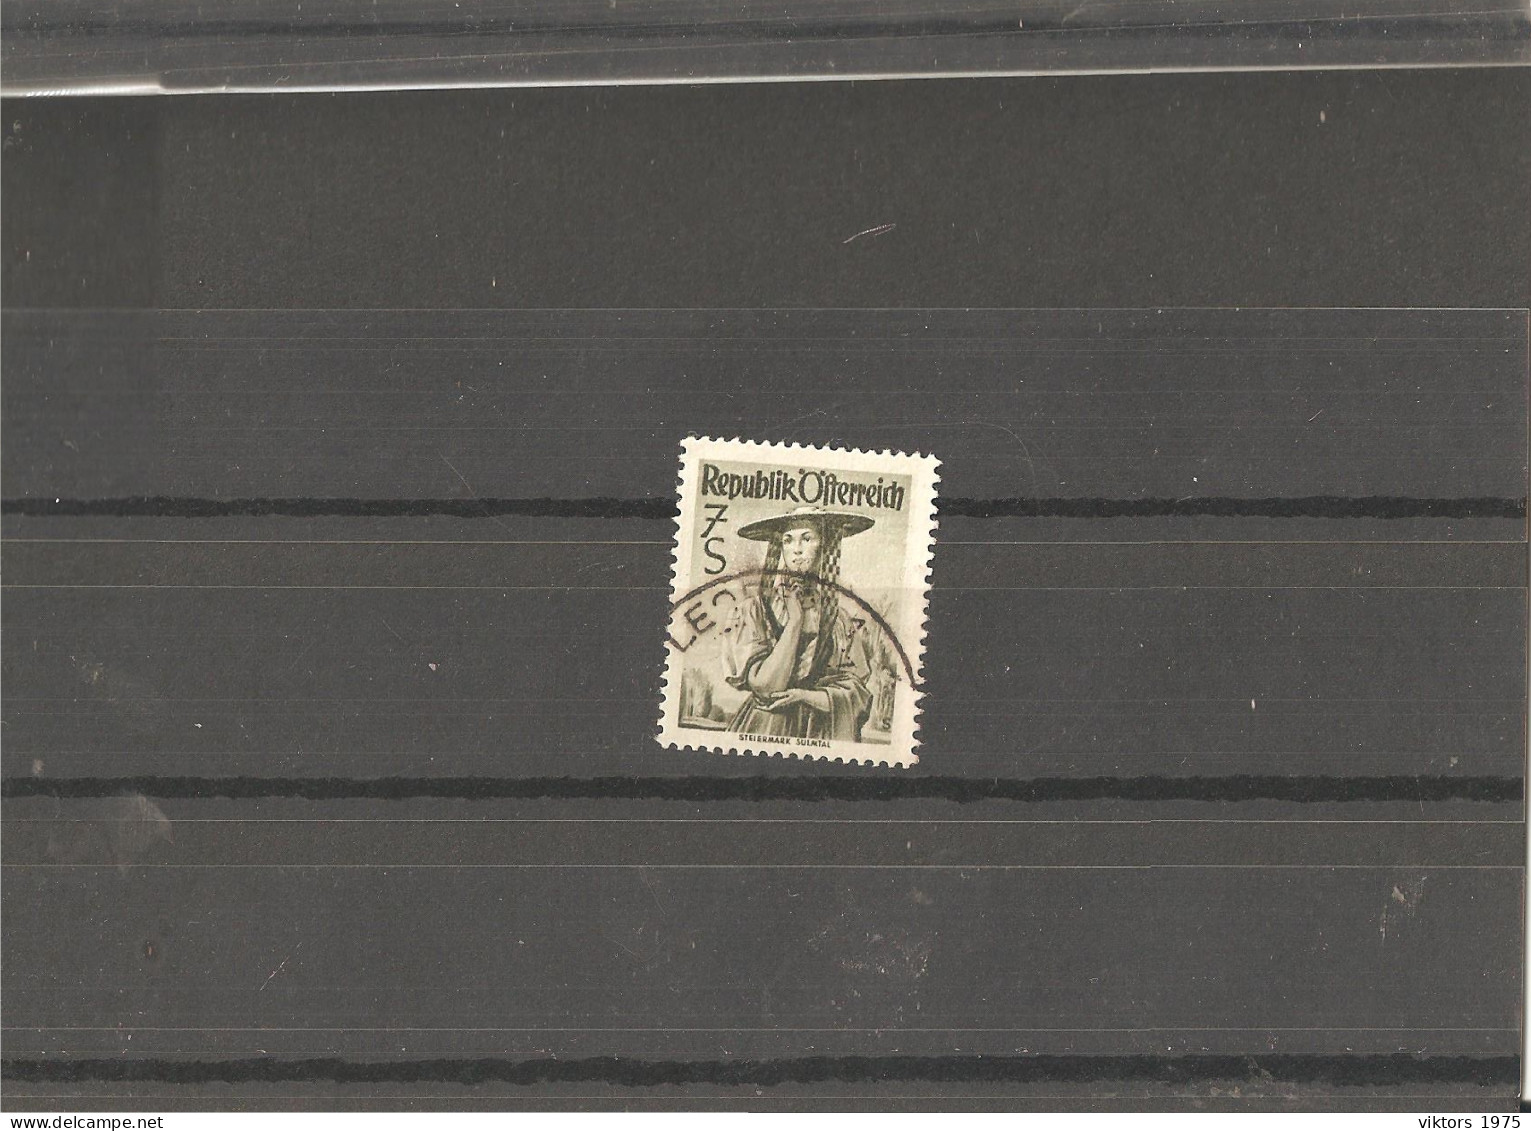 Used Stamp Nr.980 In MICHEL Catalog - Used Stamps